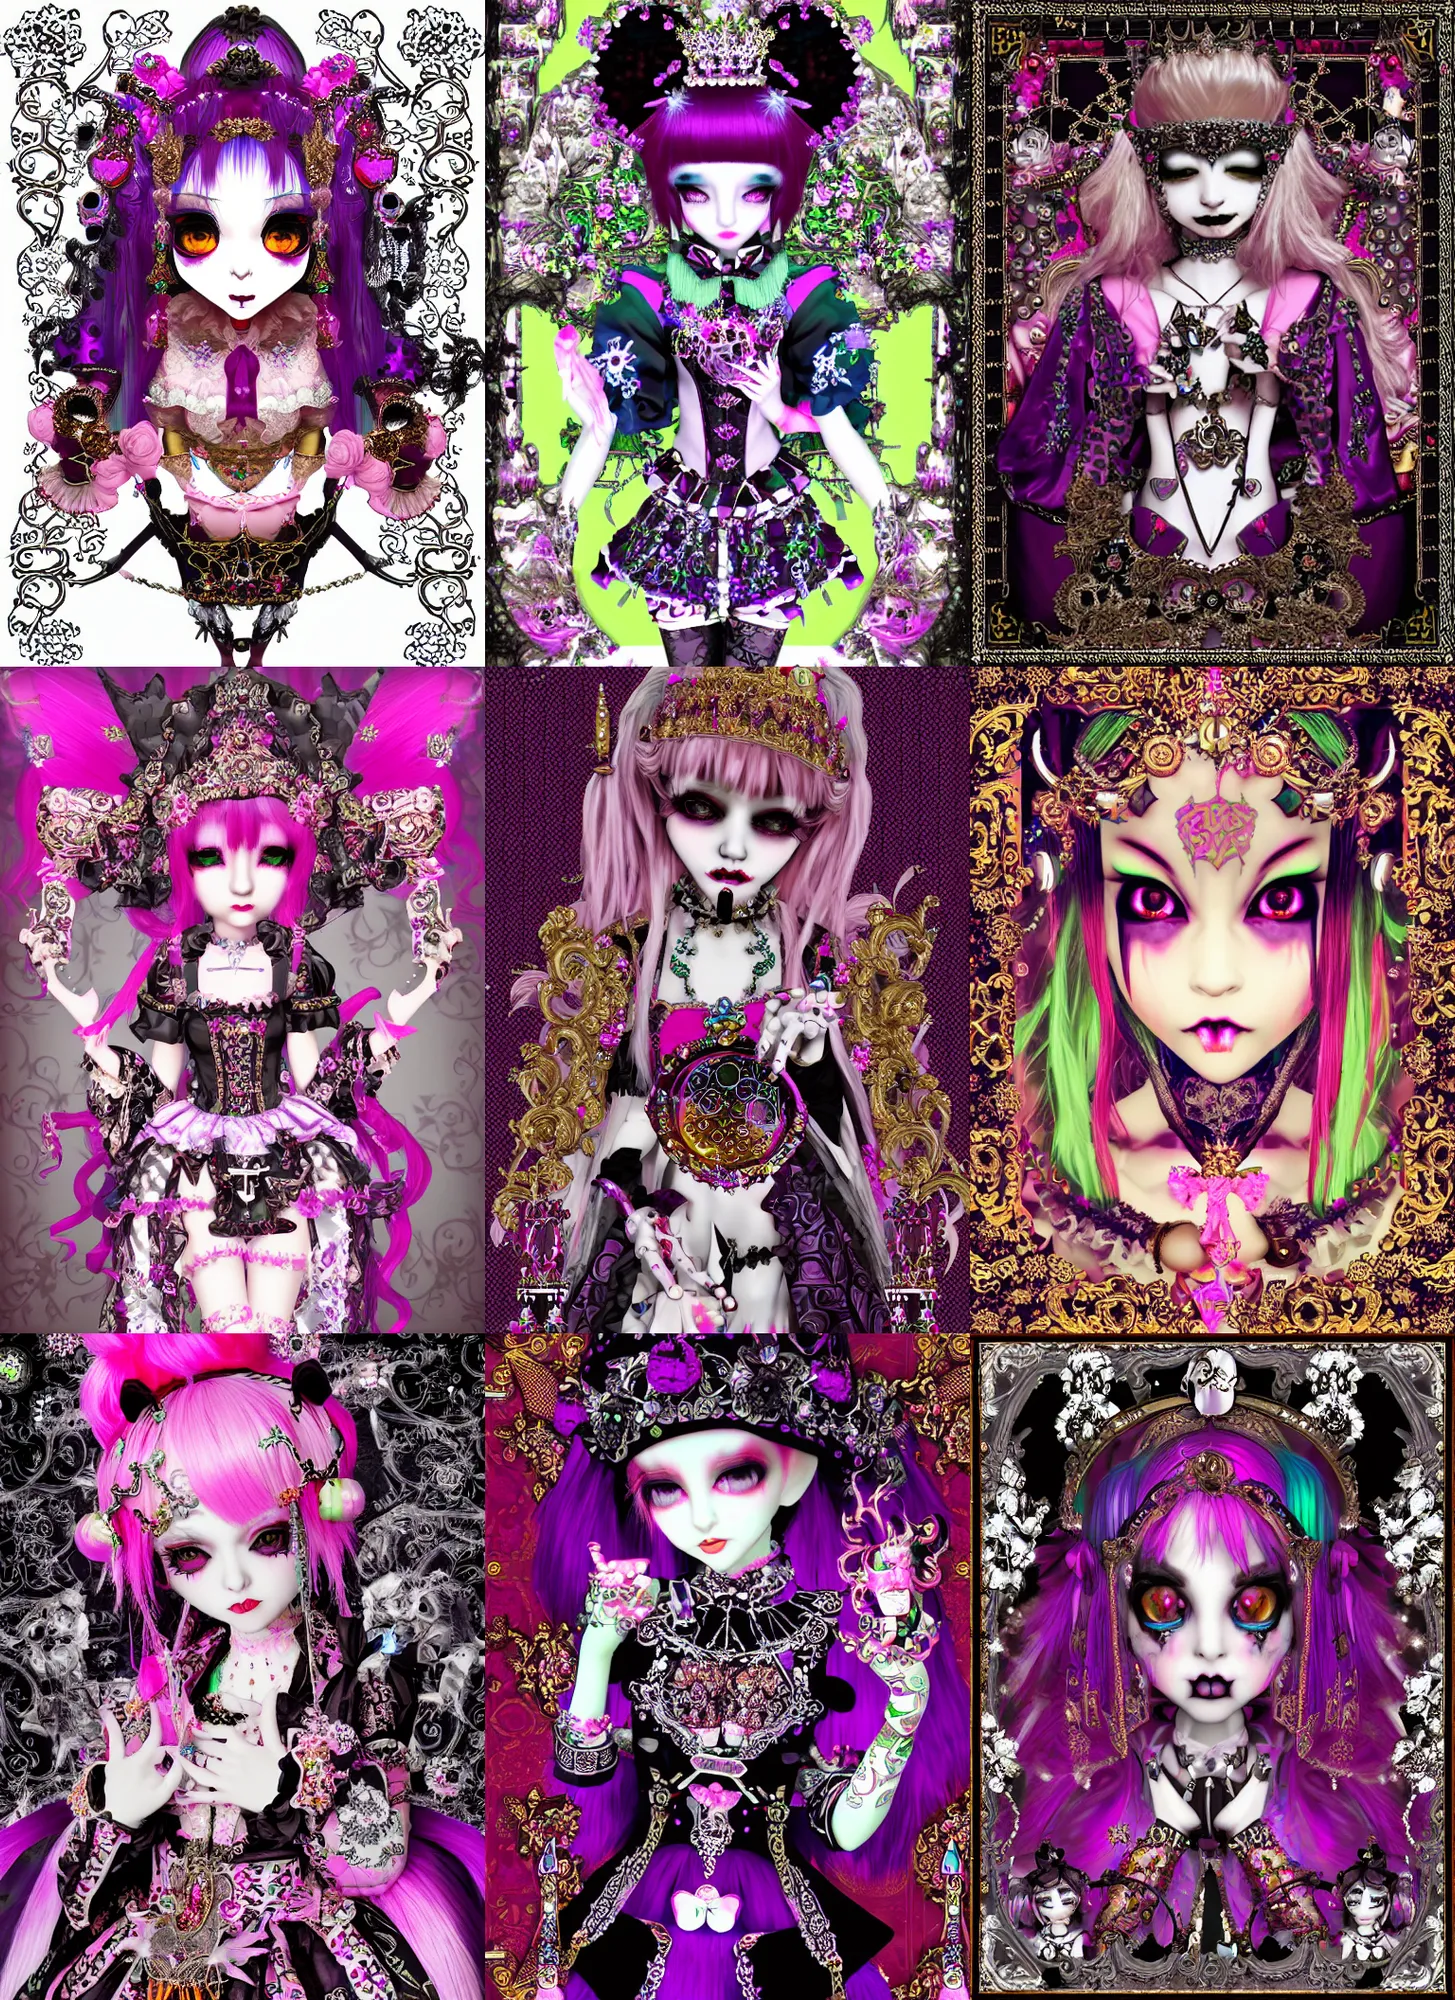 Prompt: baroque bedazzled gothic royalty frames surrounding a pixelsort emo demonic horrorcore japanese beautiful jester decora doll, sharpened early computer graphics, remastered chromatic aberration